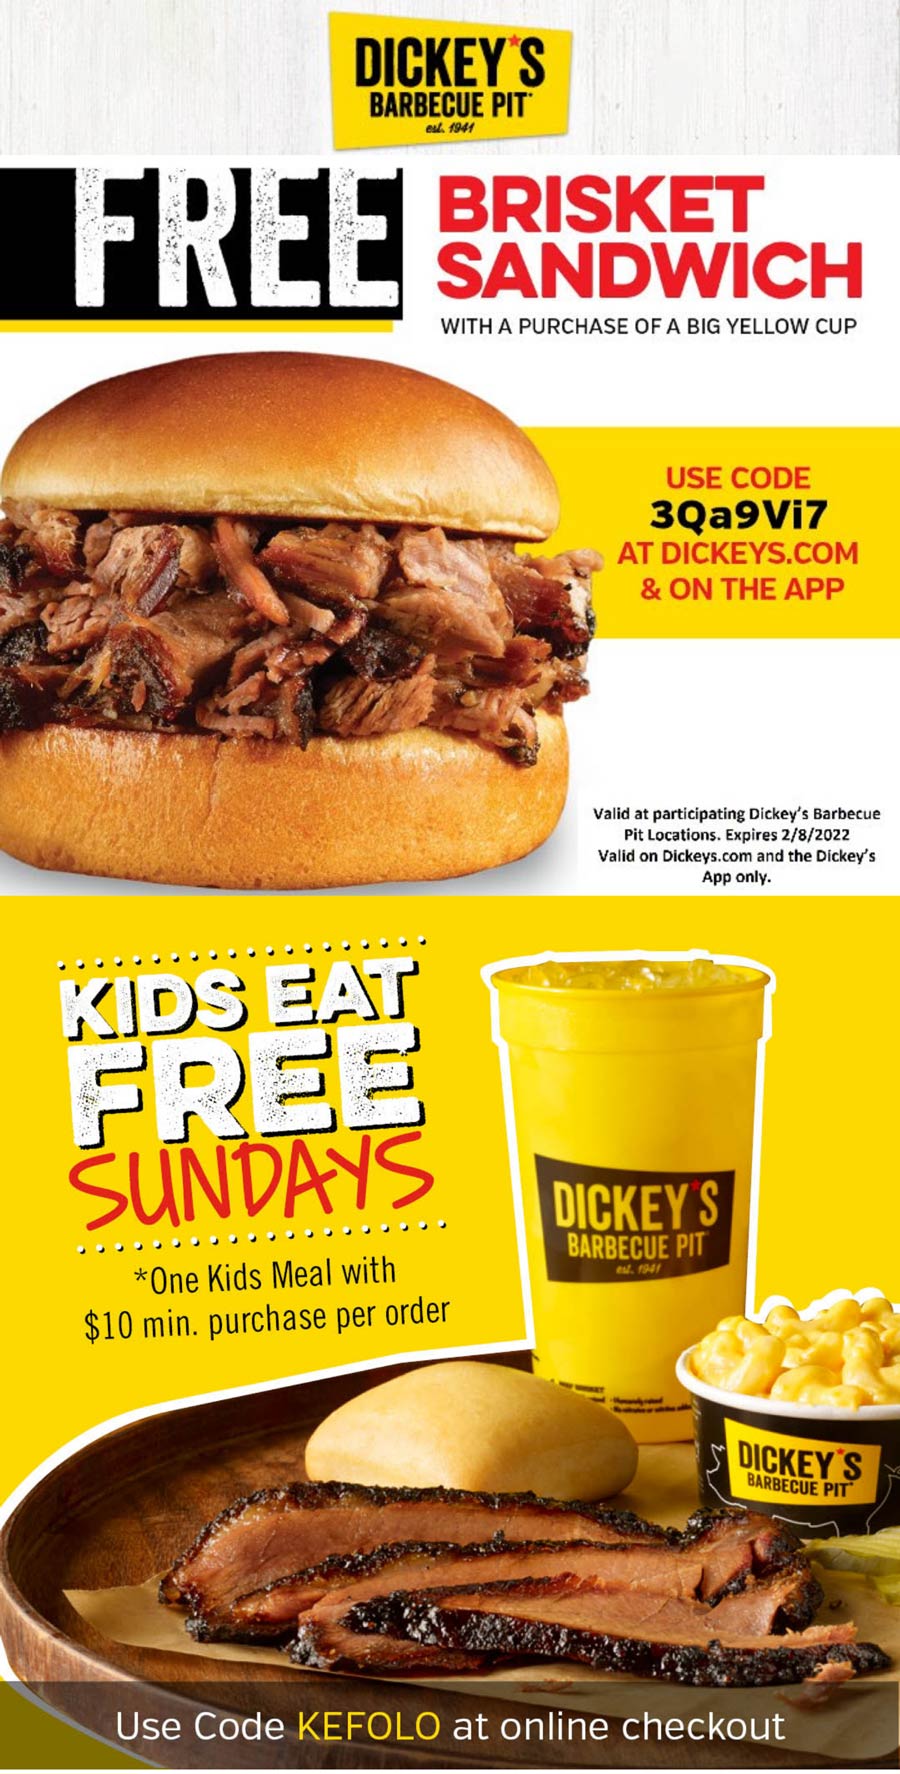 Dickeys Barbecue Pit restaurants Coupon  Free brisket sandwich with your drink at Dickeys Barbecue Pit via promo 3Qa9Vi7, also kids free Sundays #dickeysbarbecuepit 